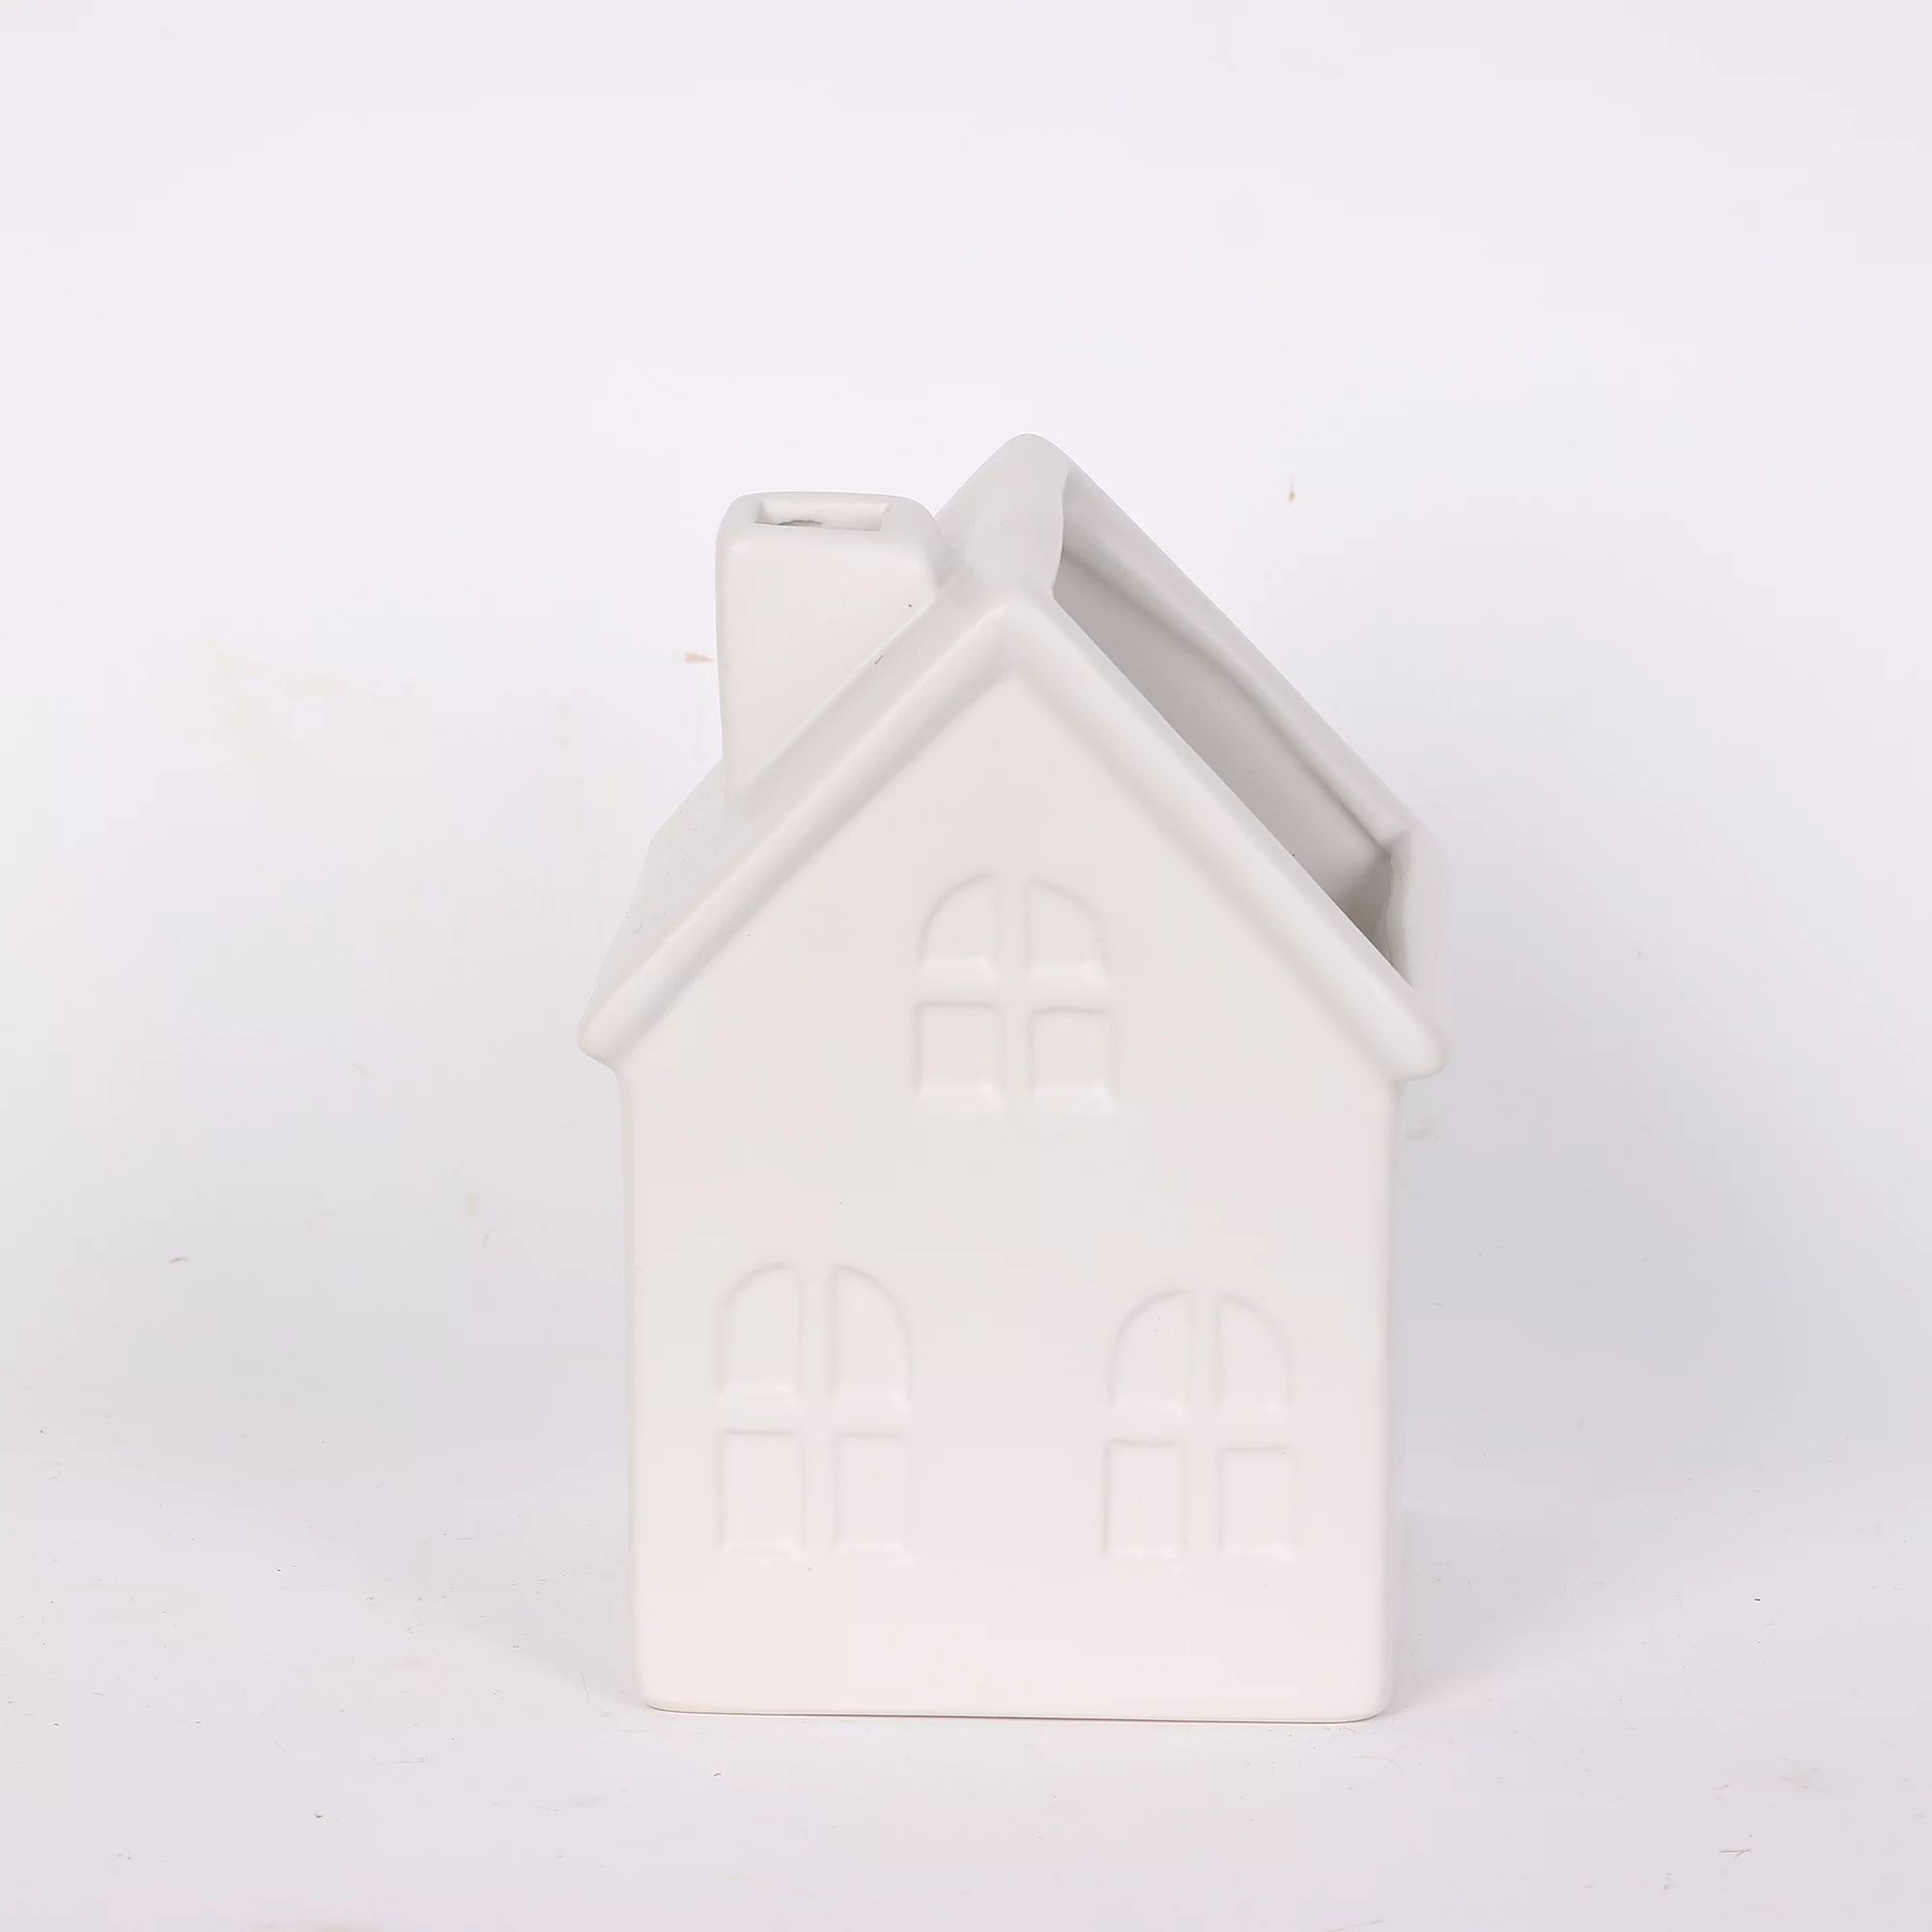 6.5 in Ceramic House Tabletop Christmas Decoration, White, by Holiday Time | Walmart (US)